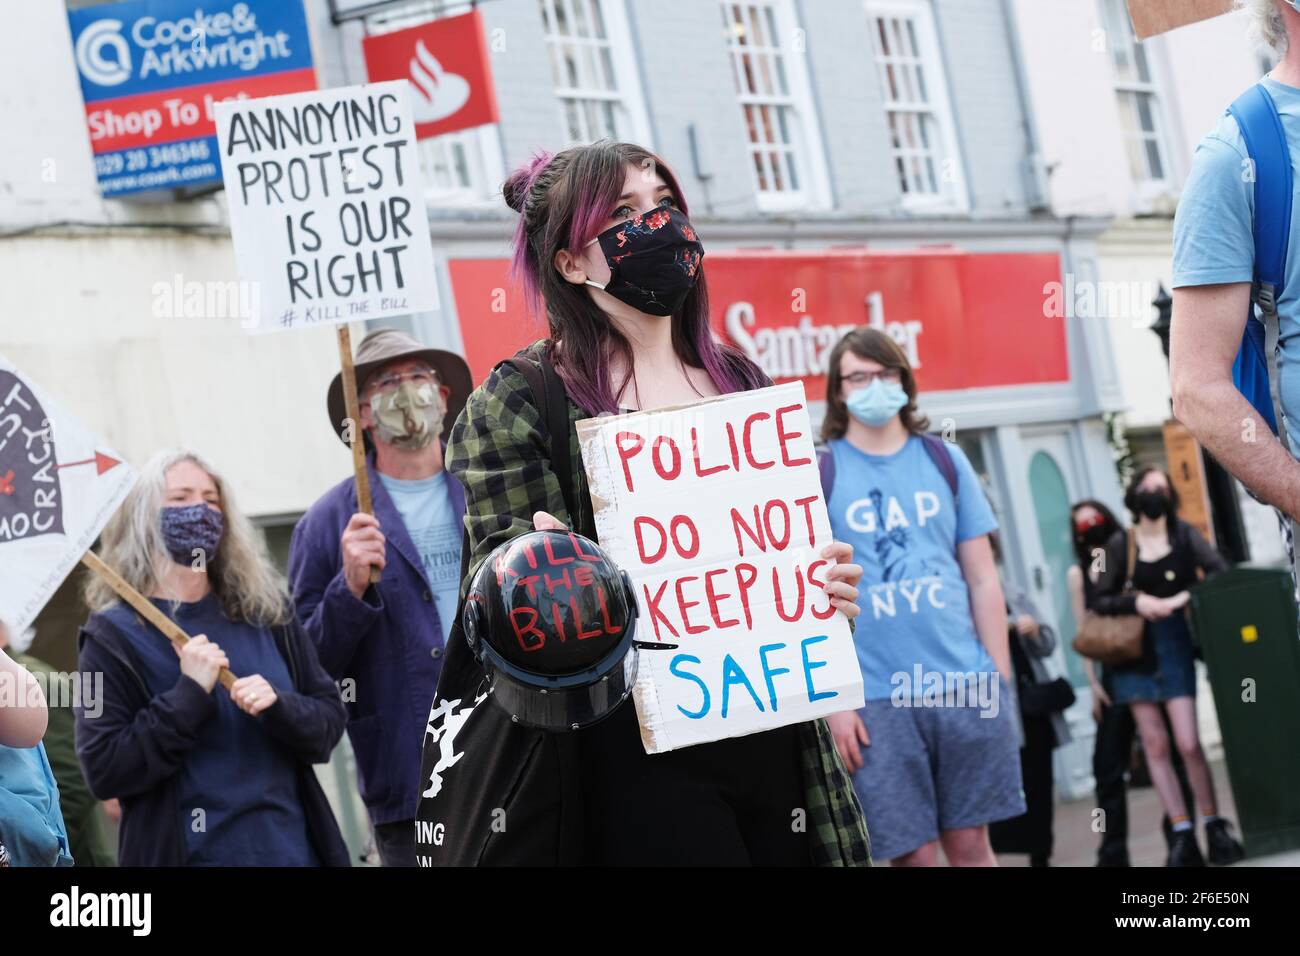 Hereford, Herefordshire, UK – Wednesday 31st March 2021 – Protesters gather to hear speeches in Hereford city centre against the Police, Crime, Sentencing and Courts Bill ( PCSC ). Approx 200 demonstrators attended the protest  - The PCSC Bill will limit their rights to legal protest. Photo Steven May / Alamy Live News Stock Photo